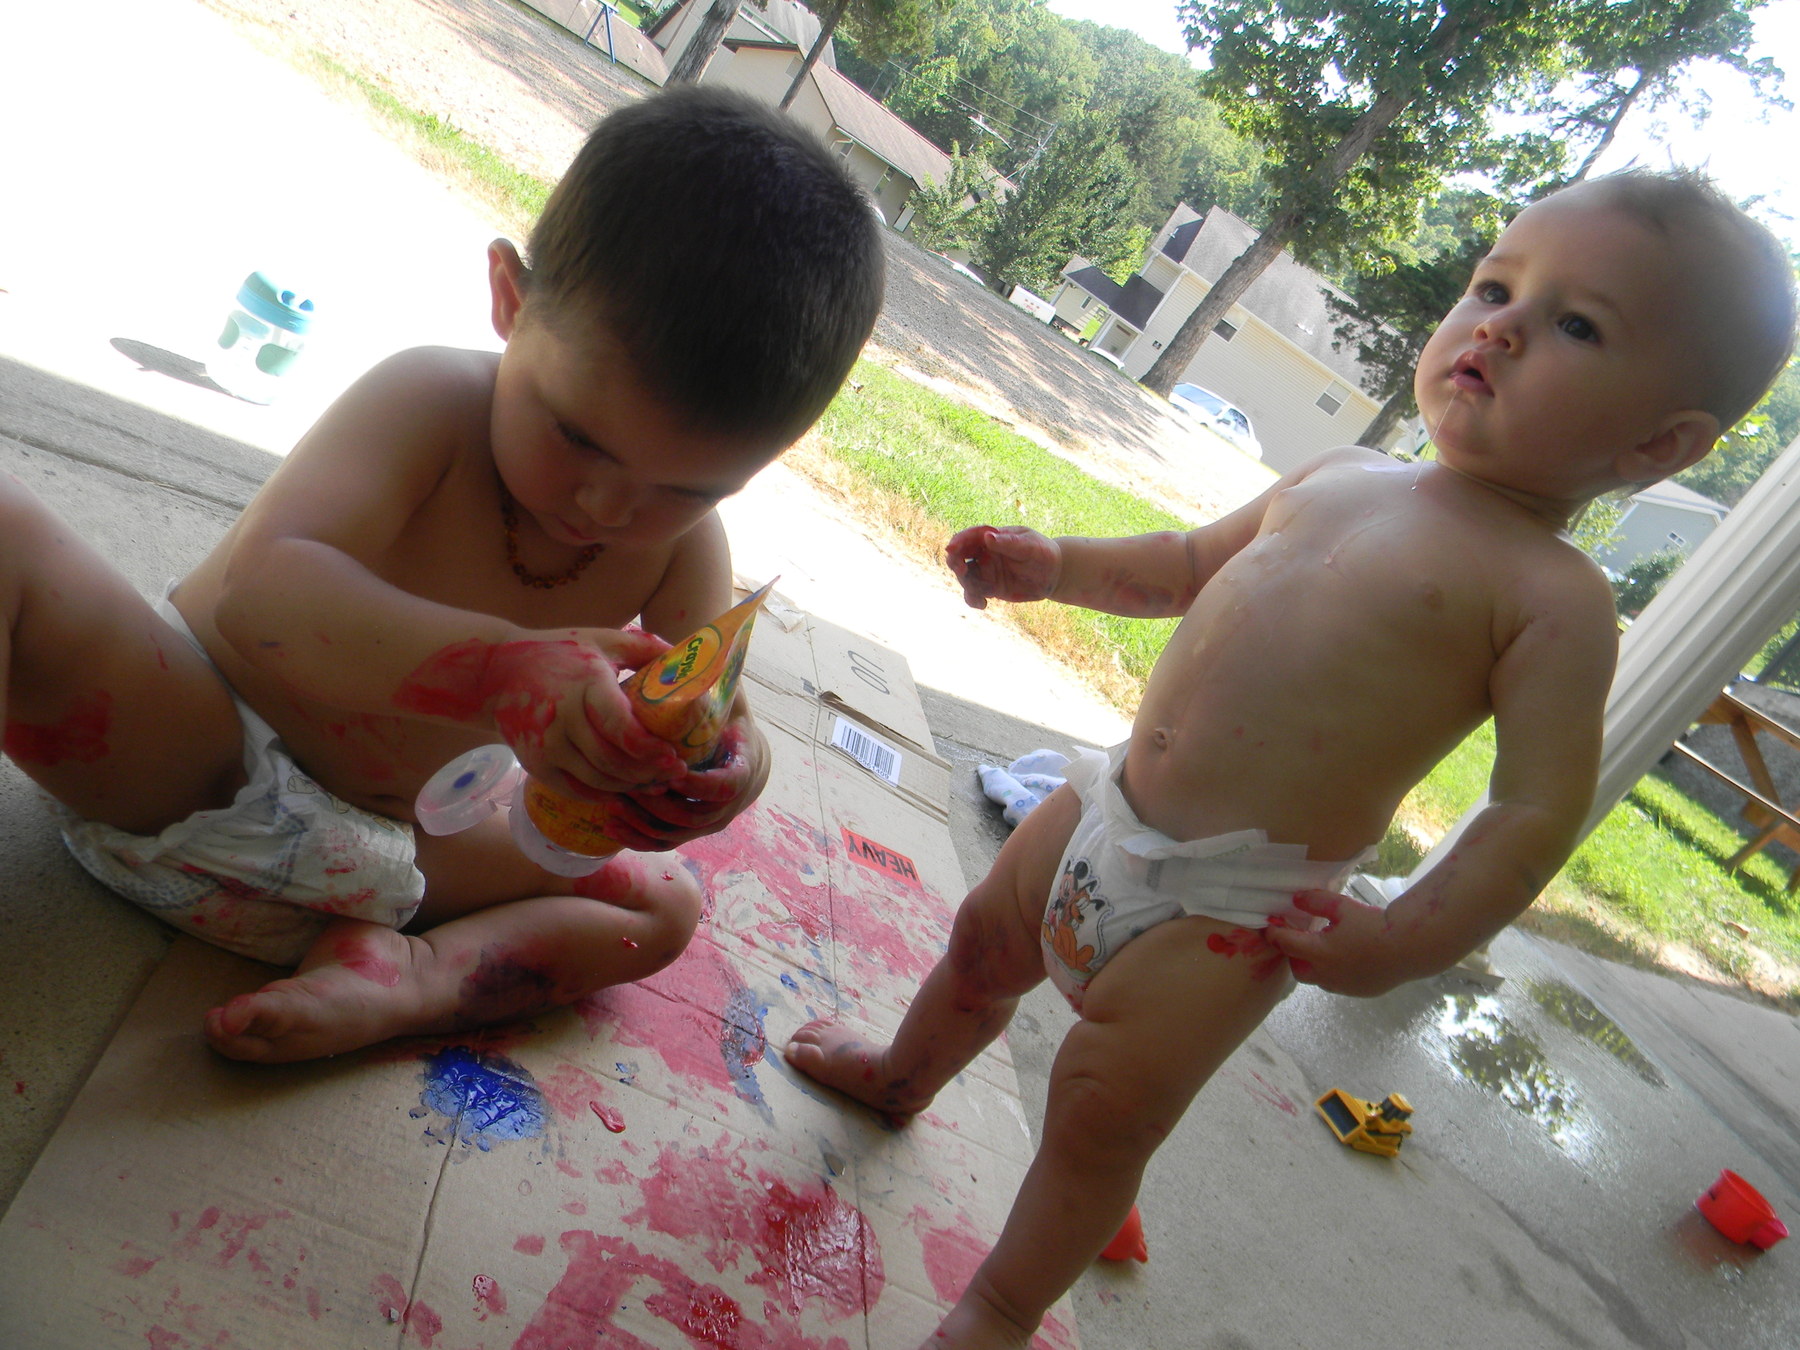 Gotta love finger paint (and  hoses to shower off they boys afterward)